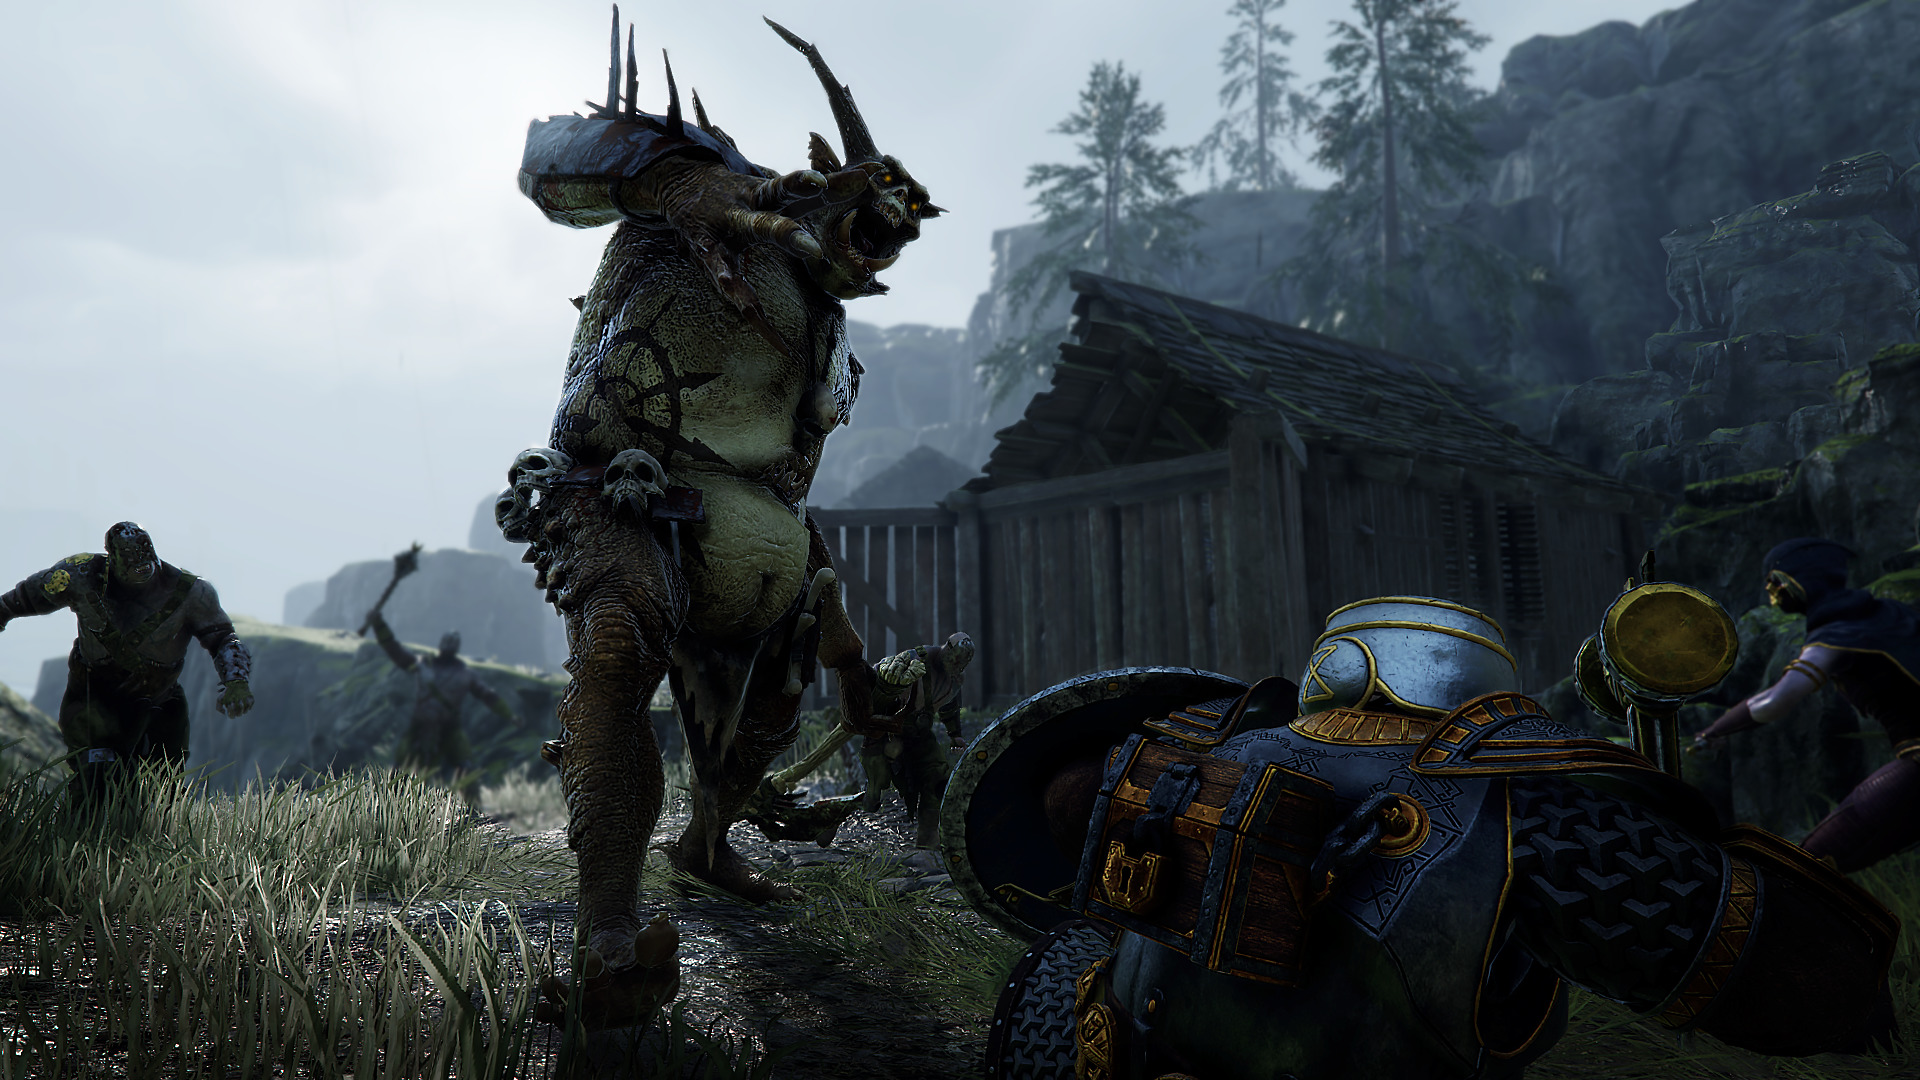 Eliminate enemies from the Warhammer universe in Vermintide 2